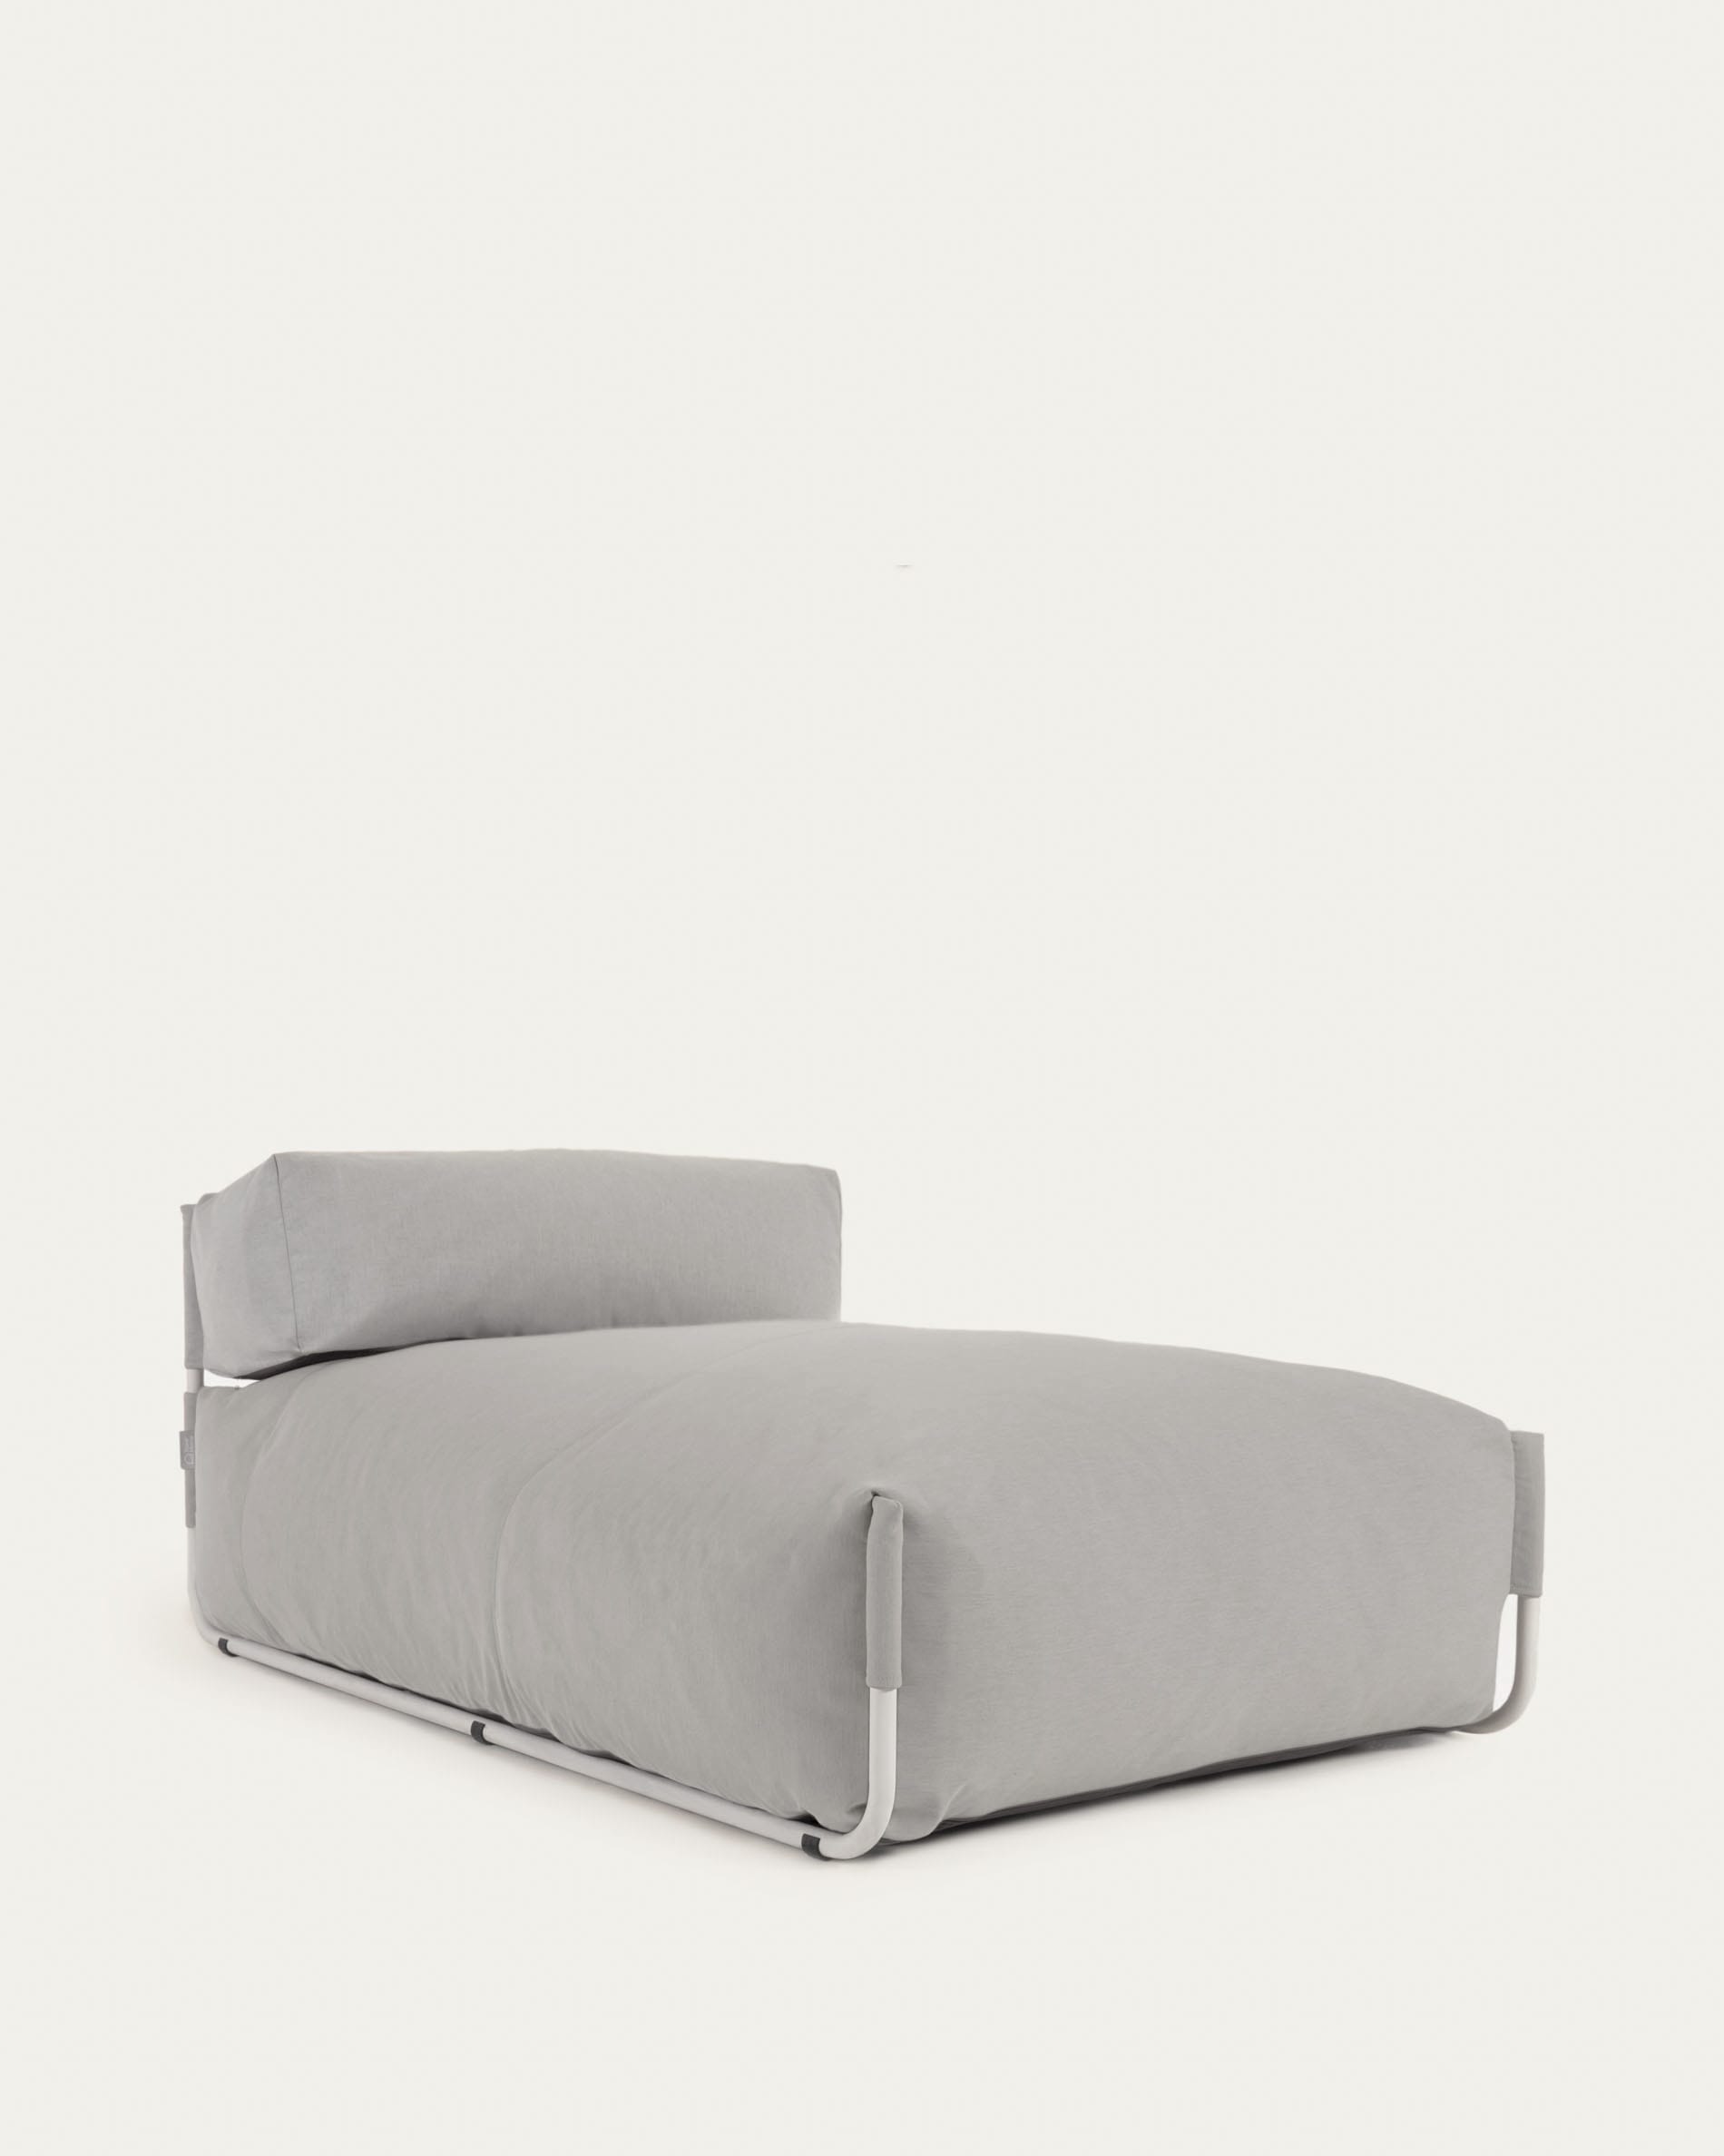 Square chaise longue pouffe with backrest in light grey with white aluminium, 165 x 101 cm